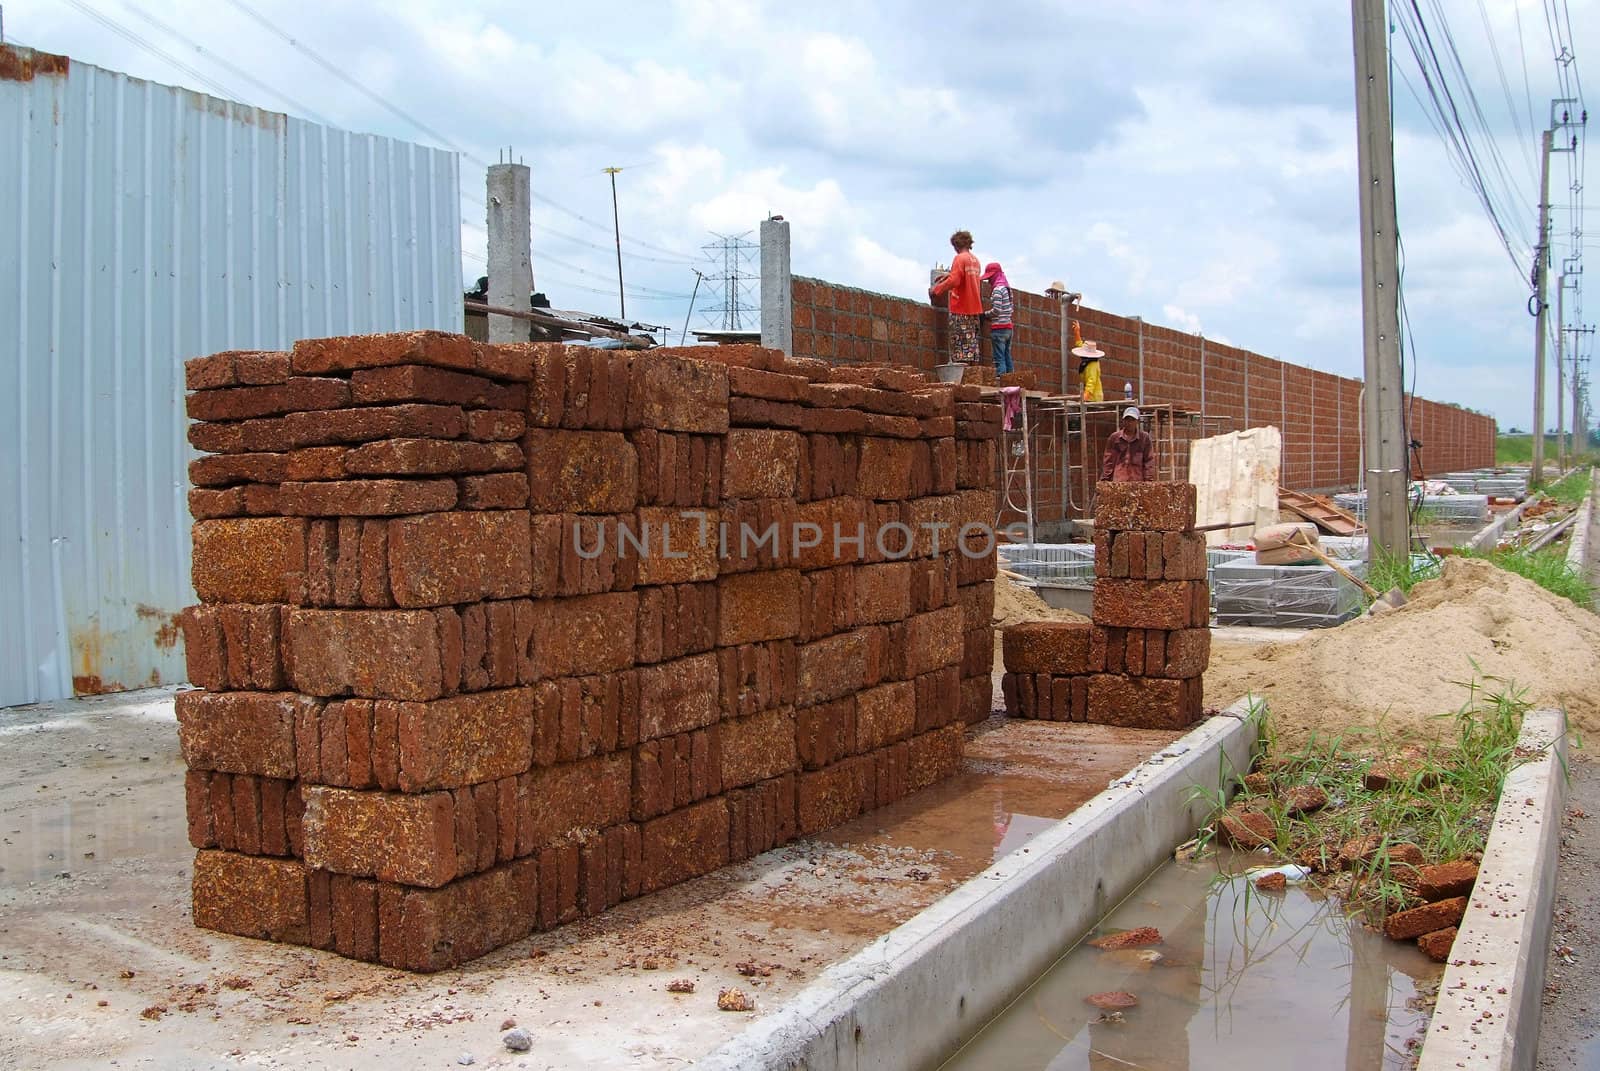 Laterite bricks for the construction of a brick wall.
